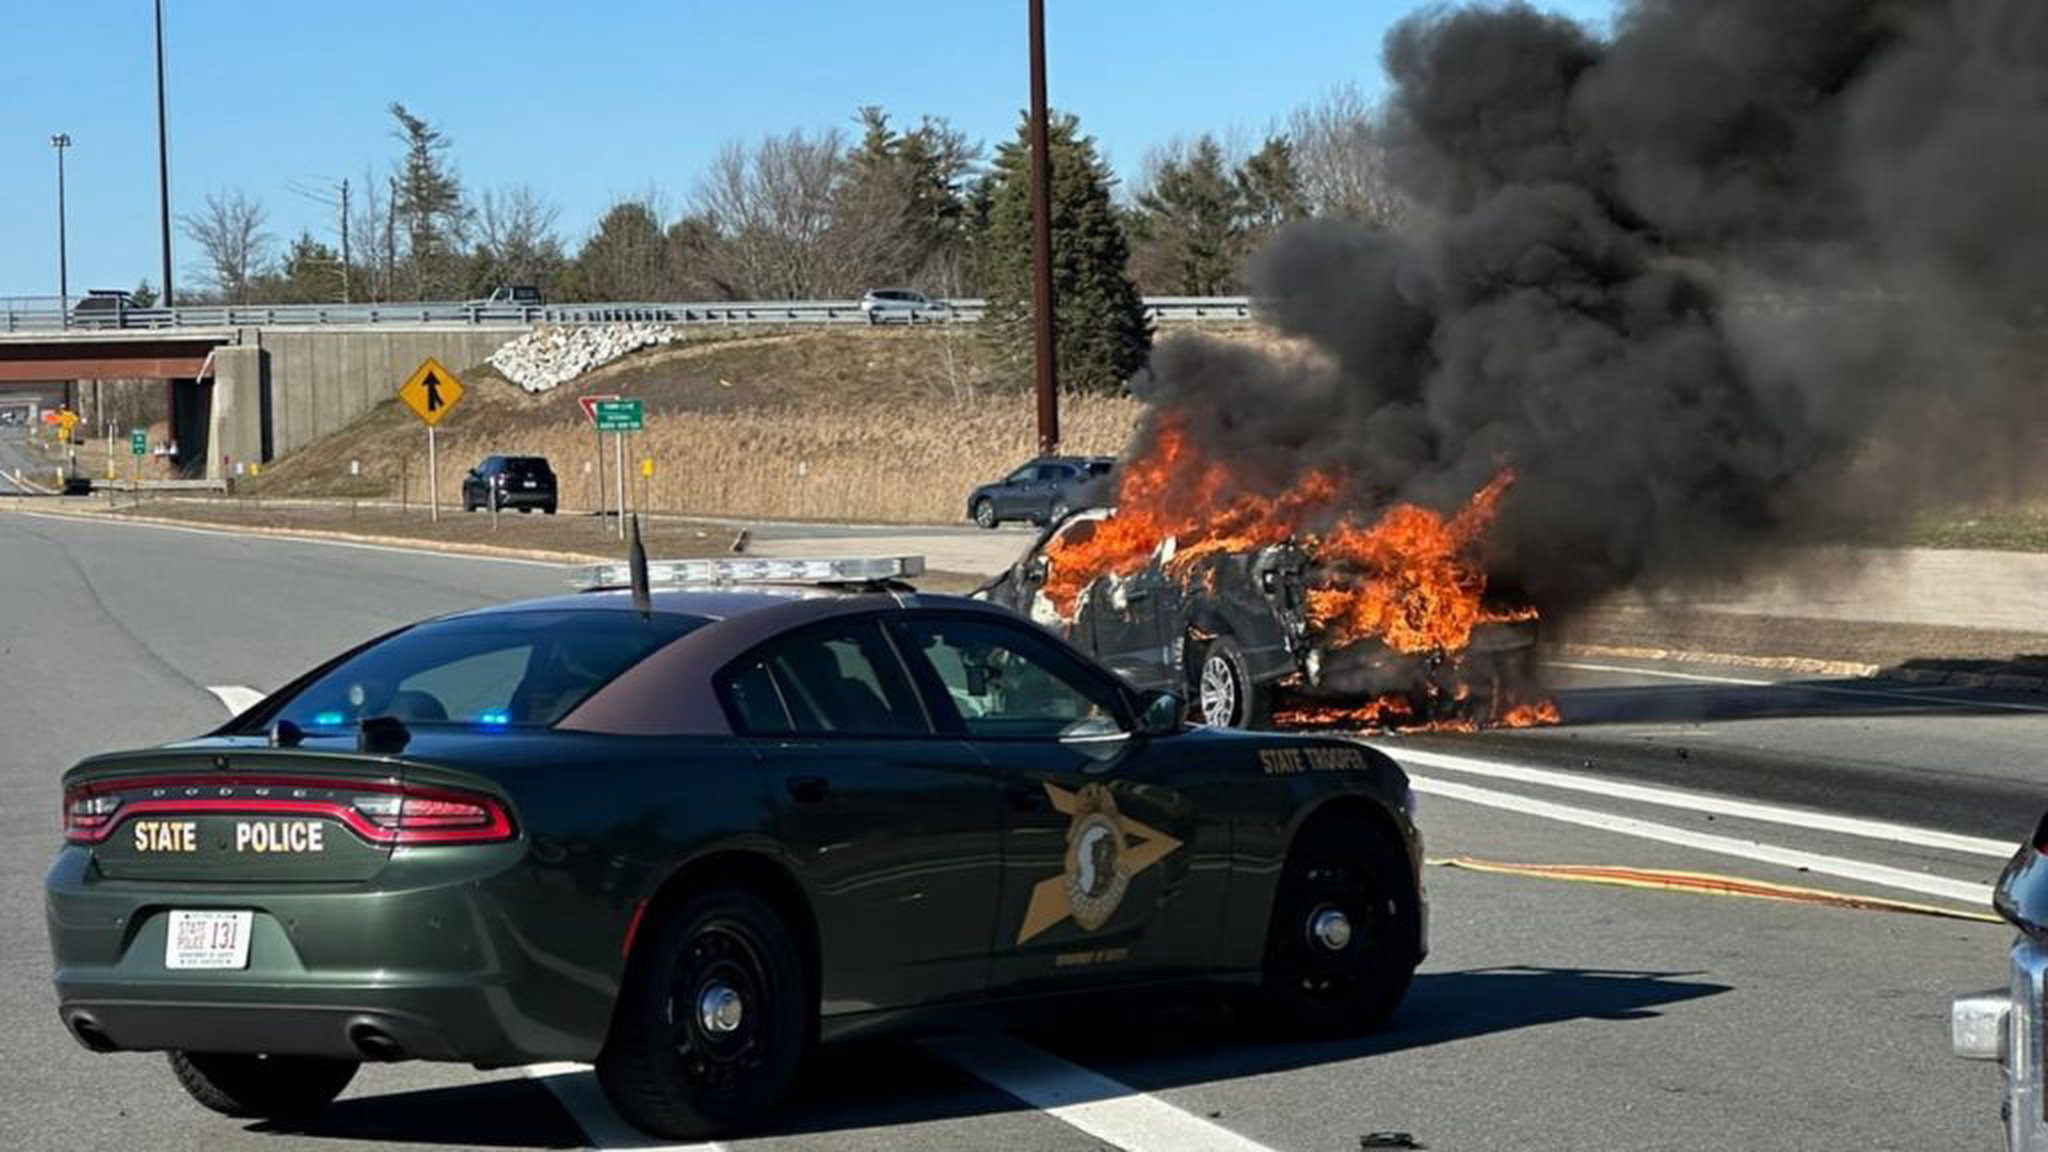 Truck crashes into a toll booth on I-95 north in Hampton, New Hampshire and catches fire - Boston 25 News